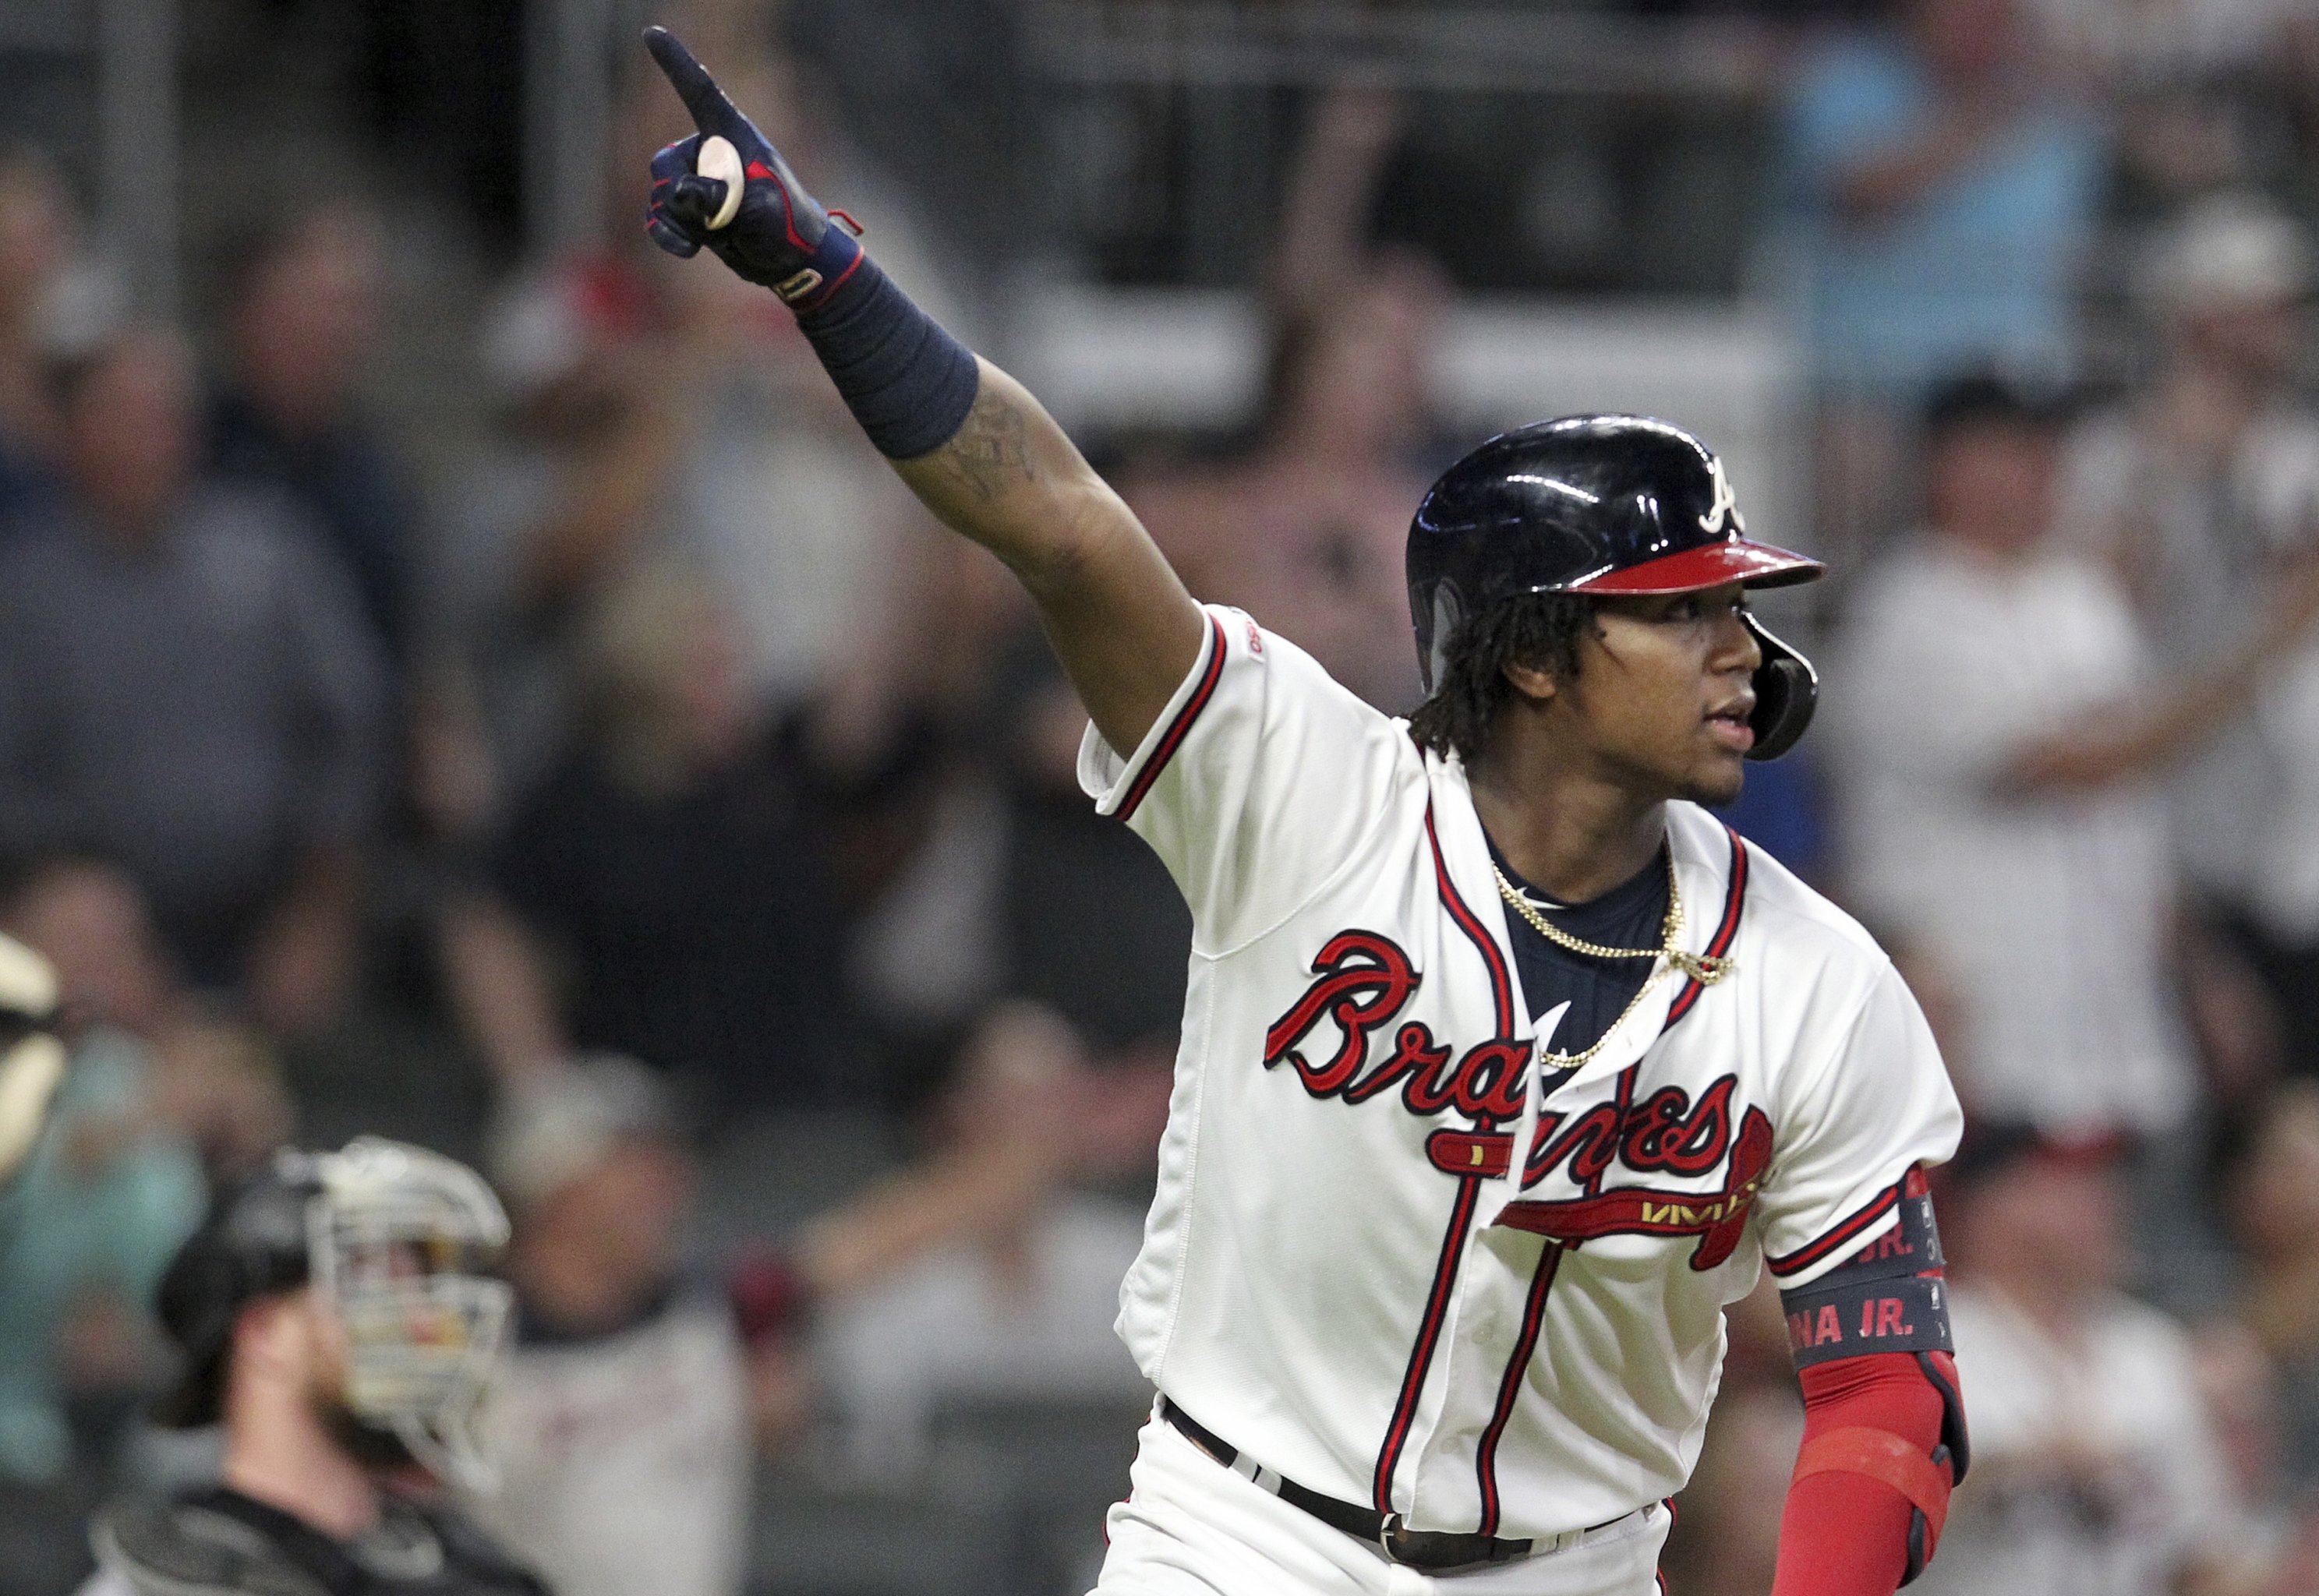  Ronald Acuna Jr.: The Inspiring Story of One of